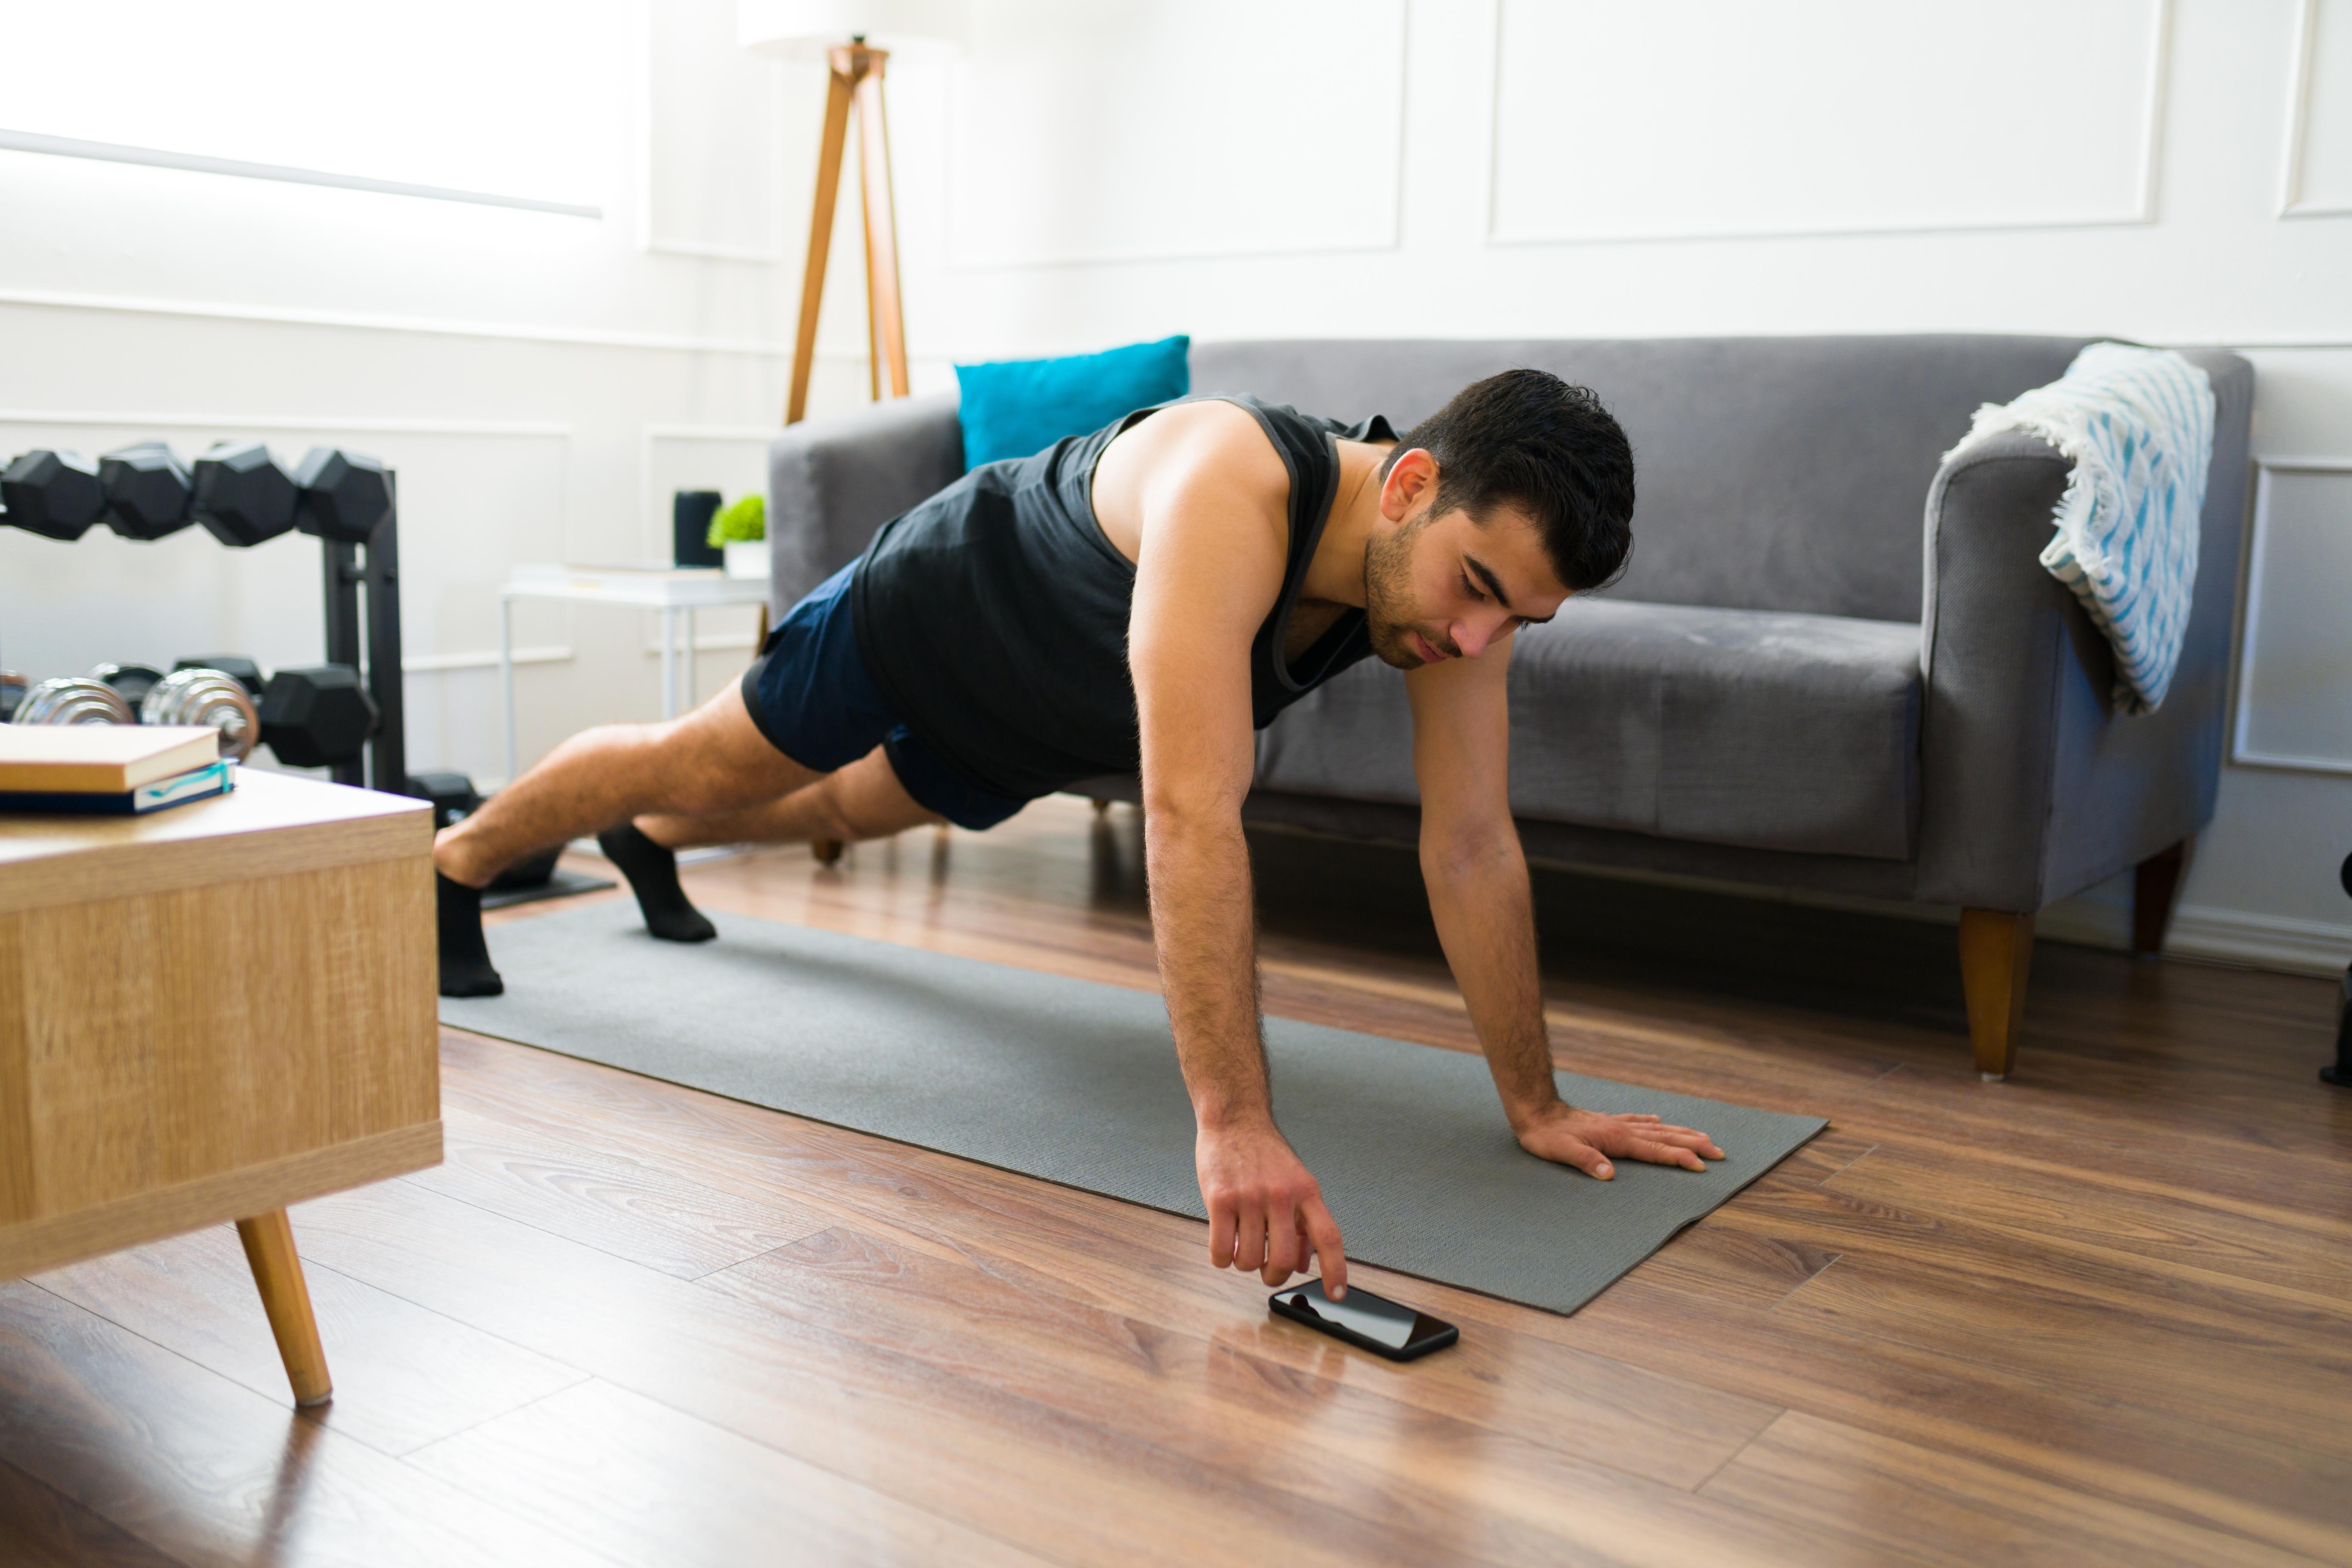 Healthy young man with a fitness lifestyle doing a plank and using the timer app on his smartphone